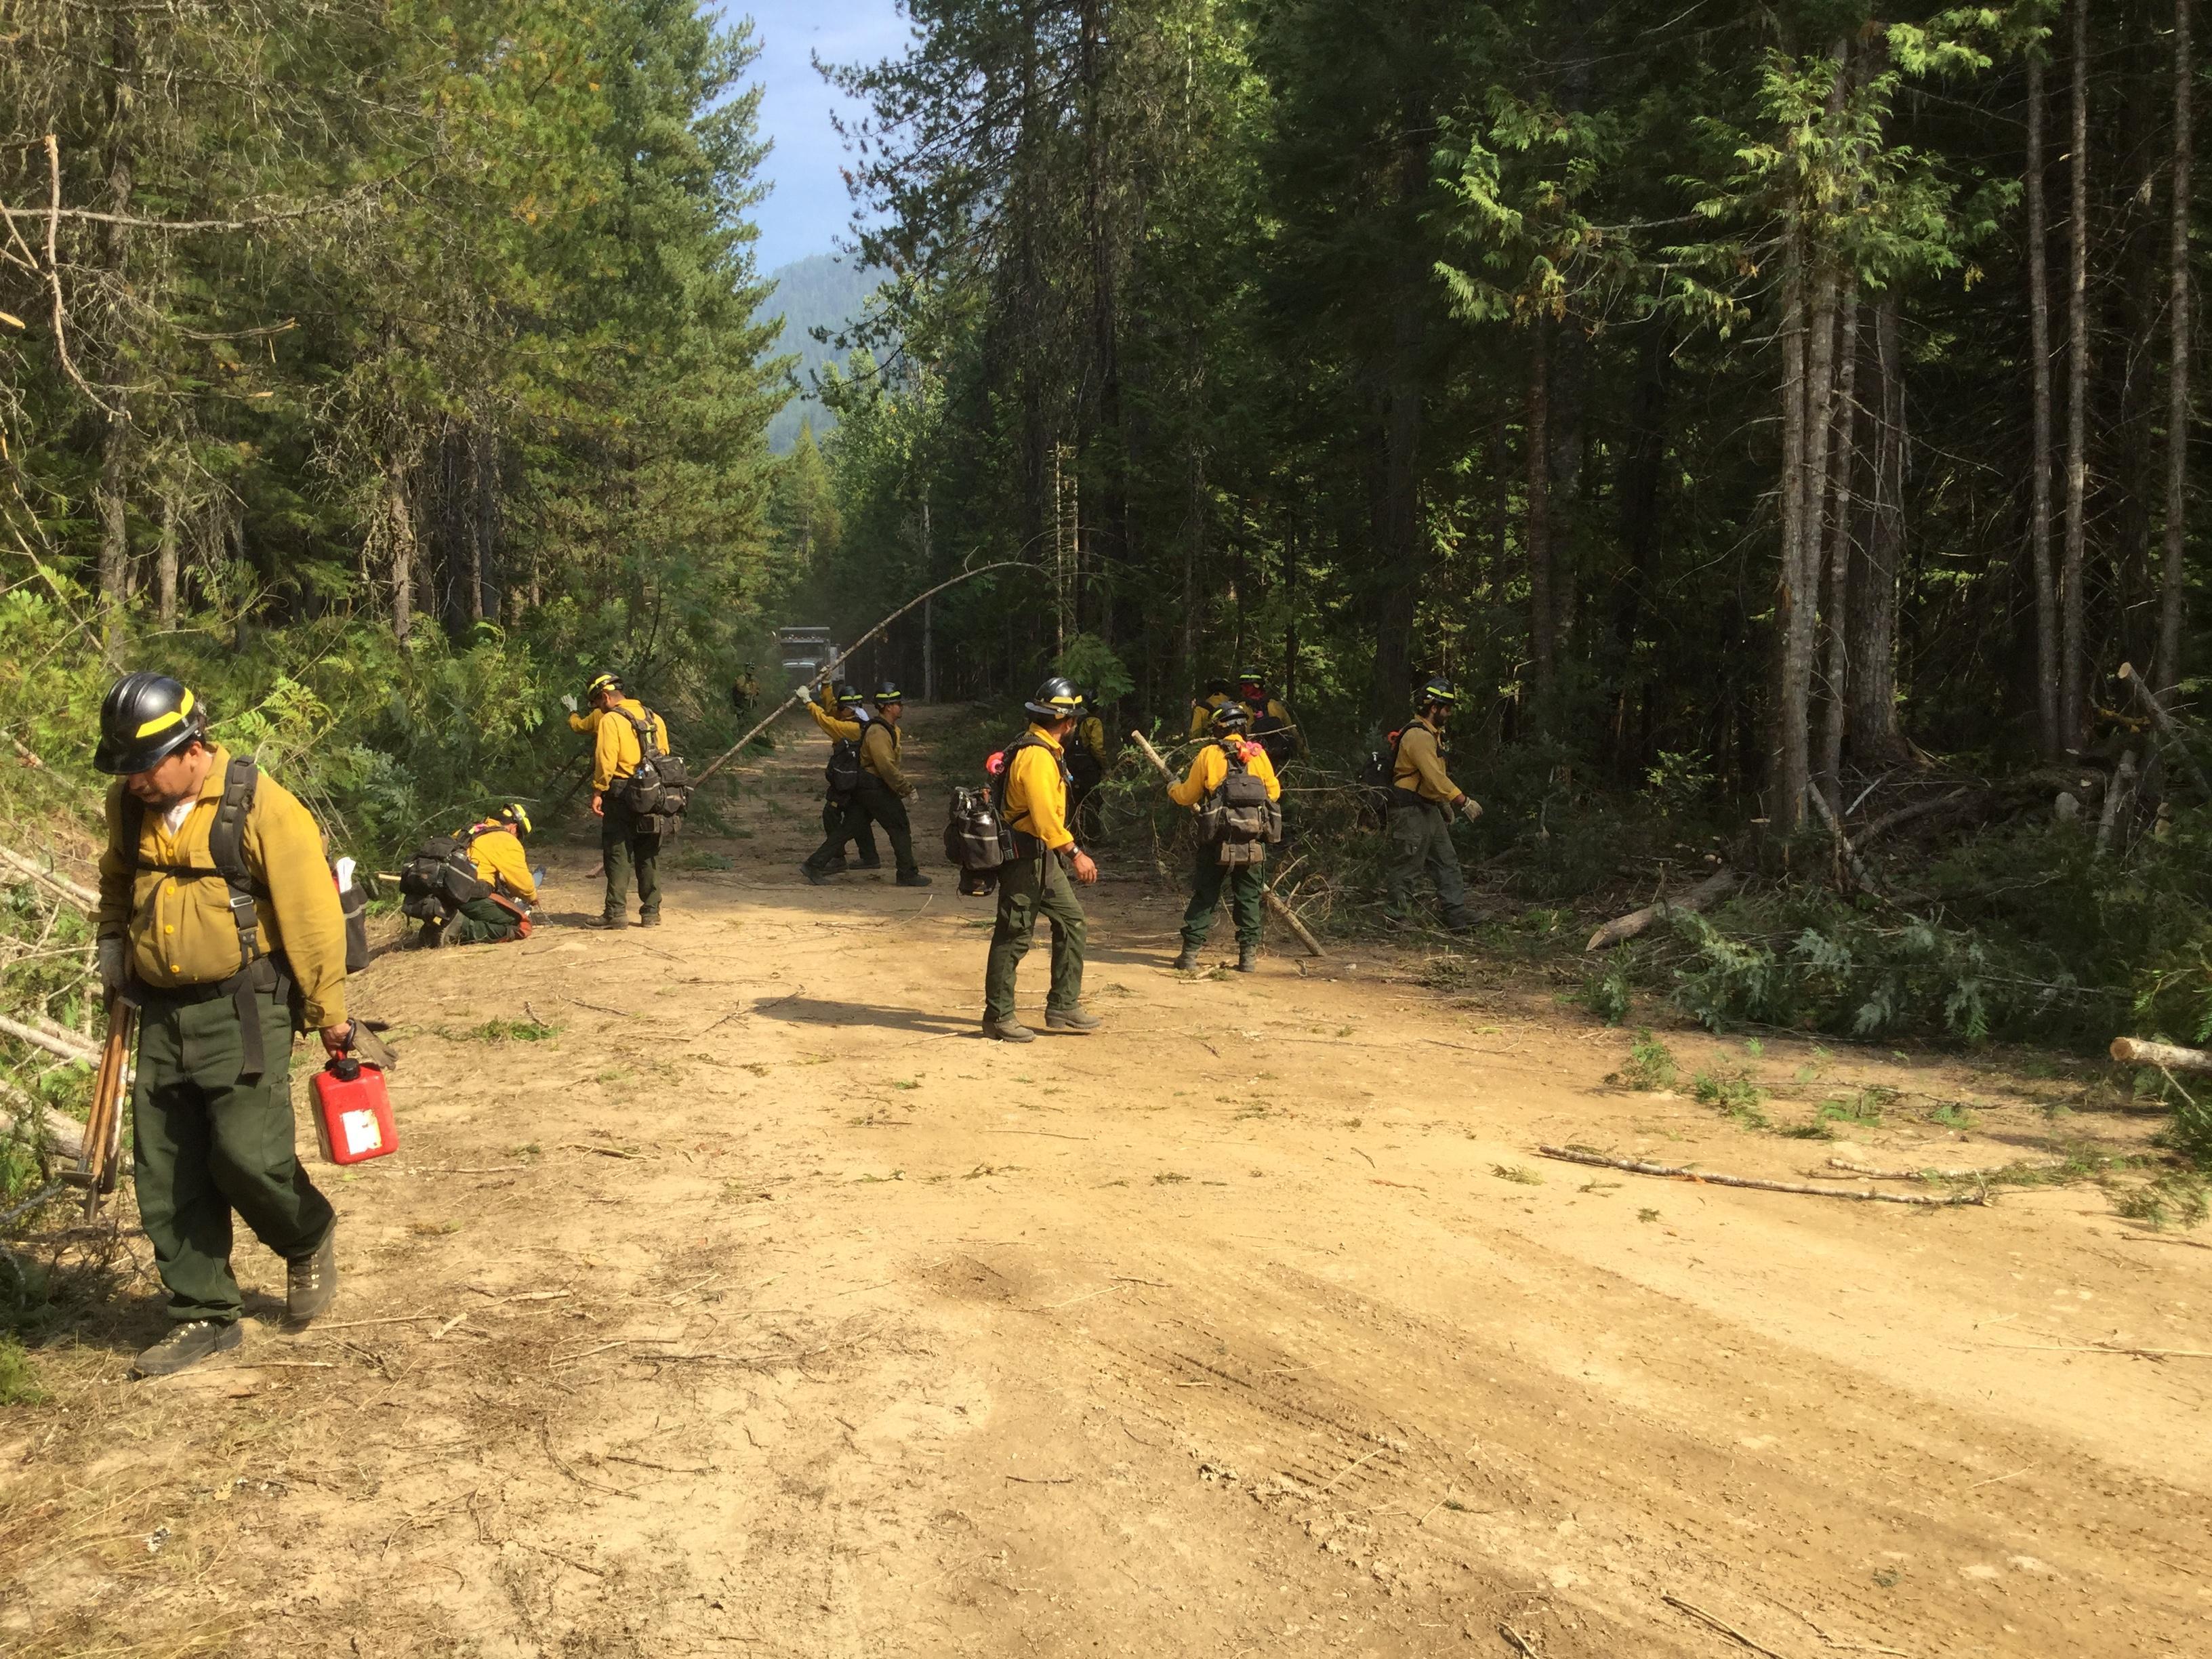 North Reforestation Crew Mitigating Fuels on the Government Fire 9.17.2022Photo: B. Giersdorf, Fire Behavior, NR Team 7